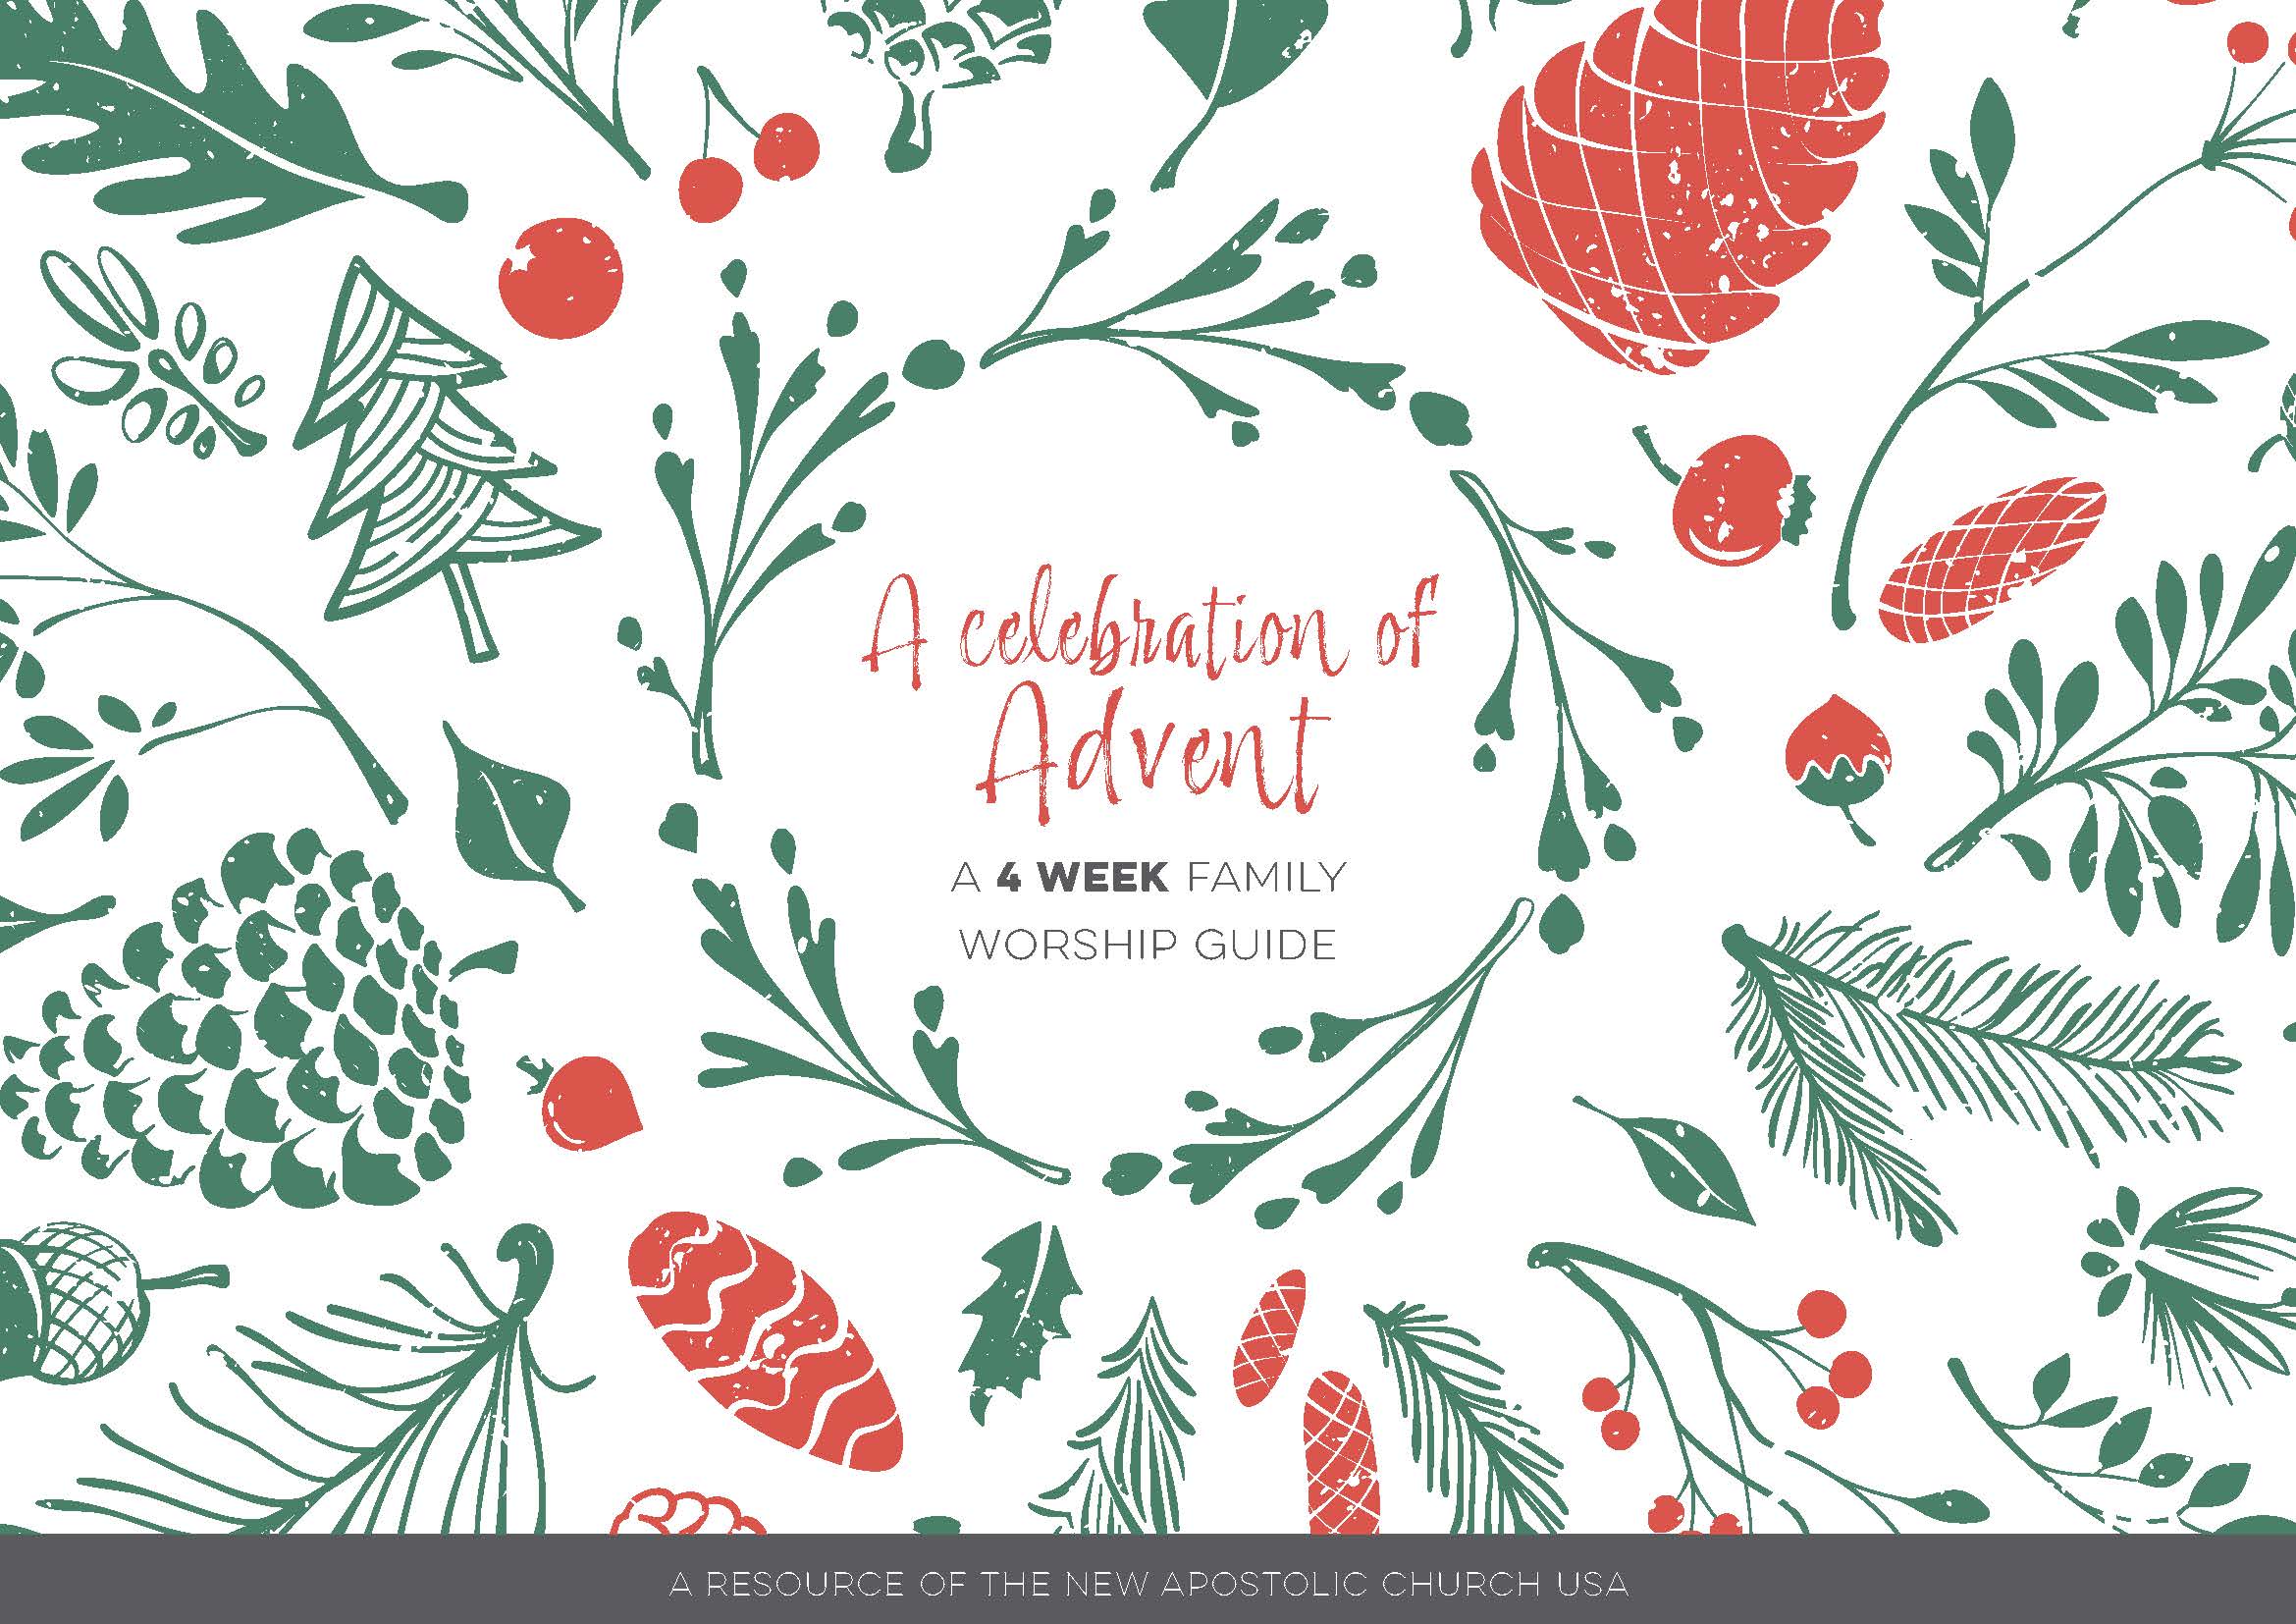 A celebration of Advent FAMILY WORSHIP GUIDE thumbnail